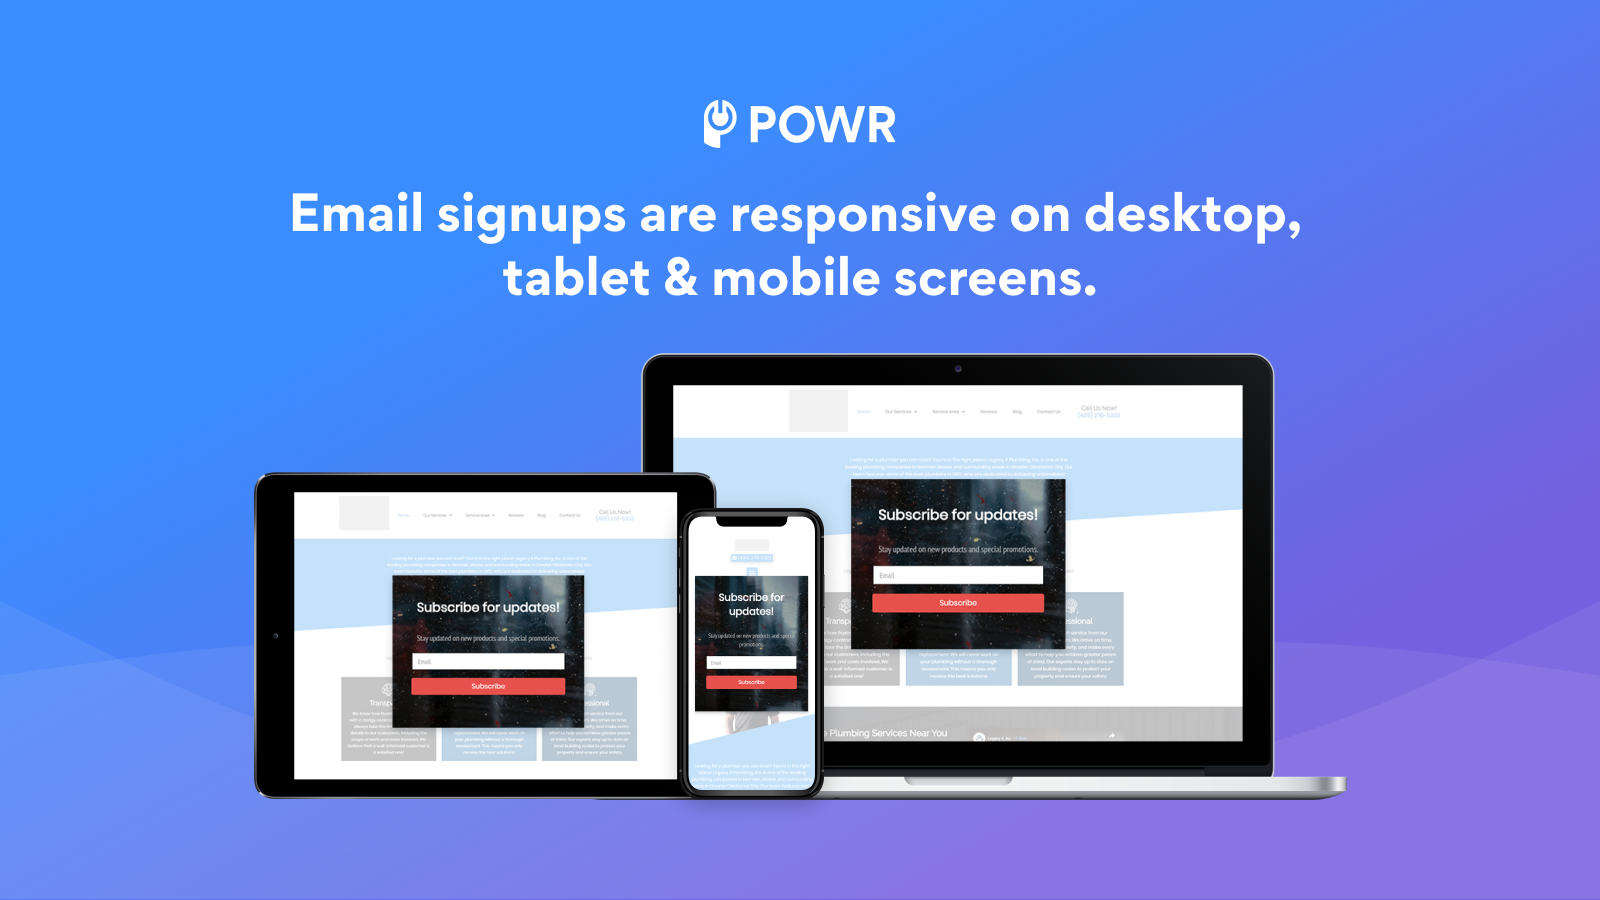 Email signups are responsive on all various devices.